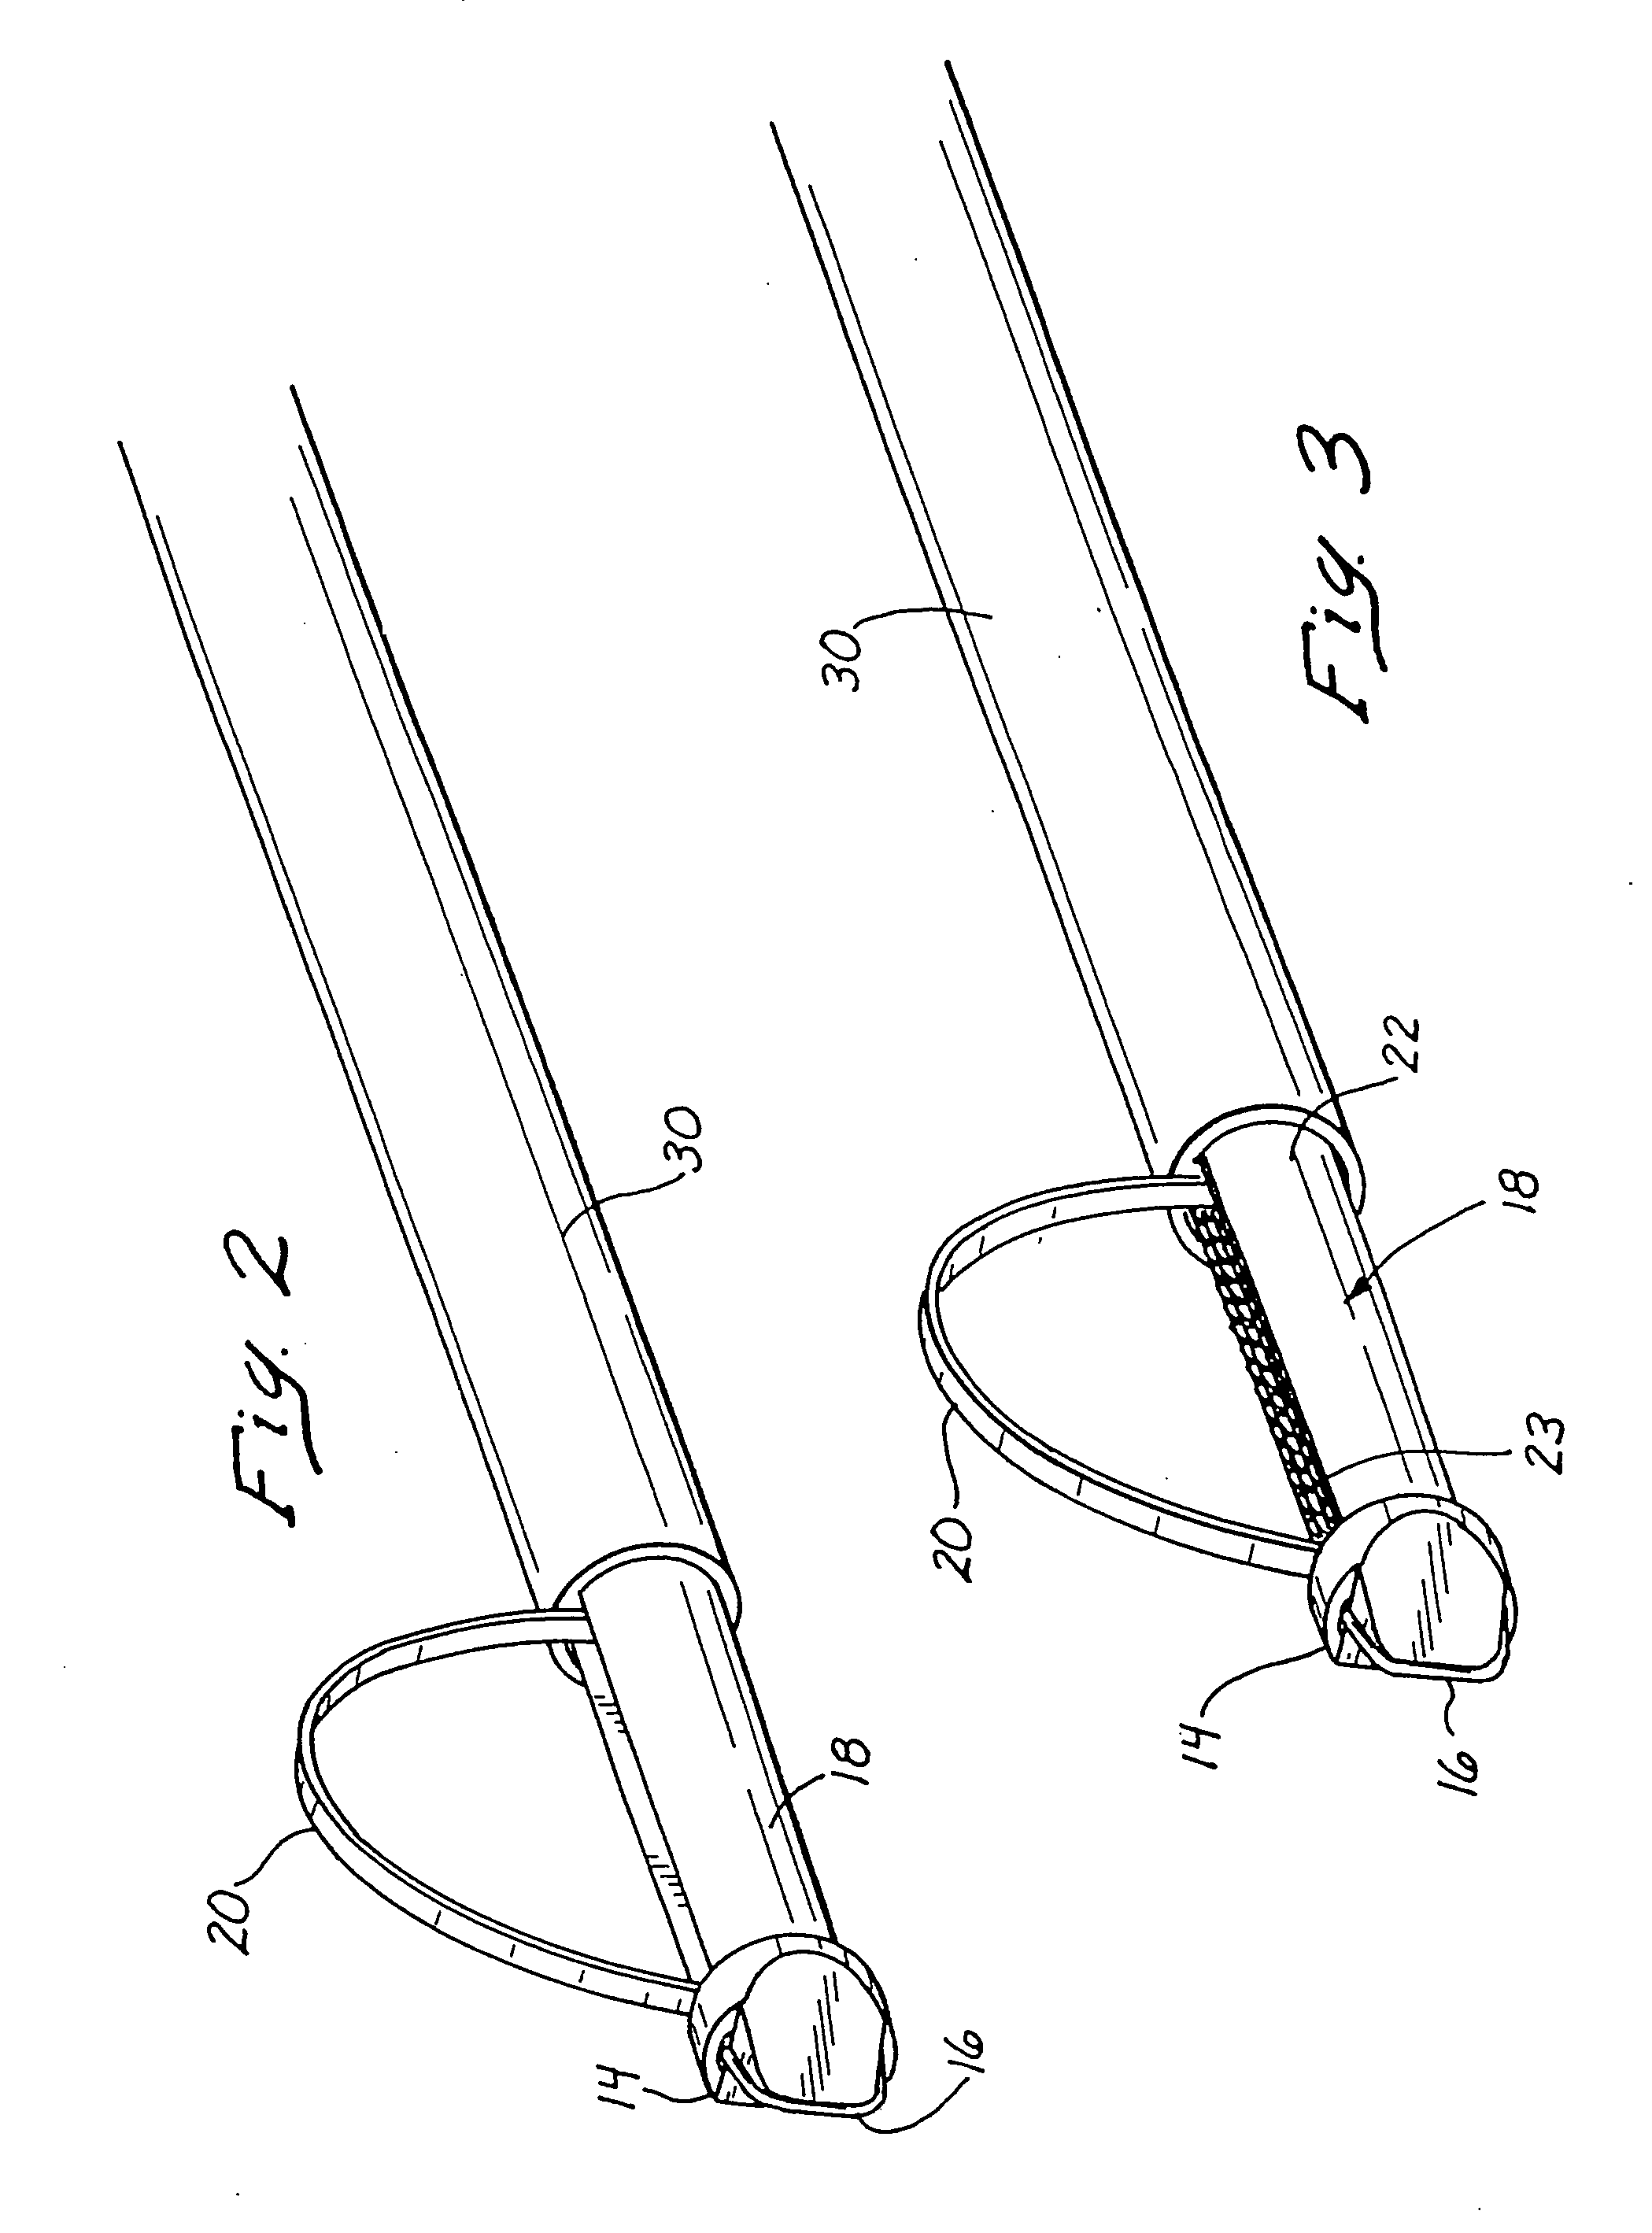 Breast biopsy system and methods